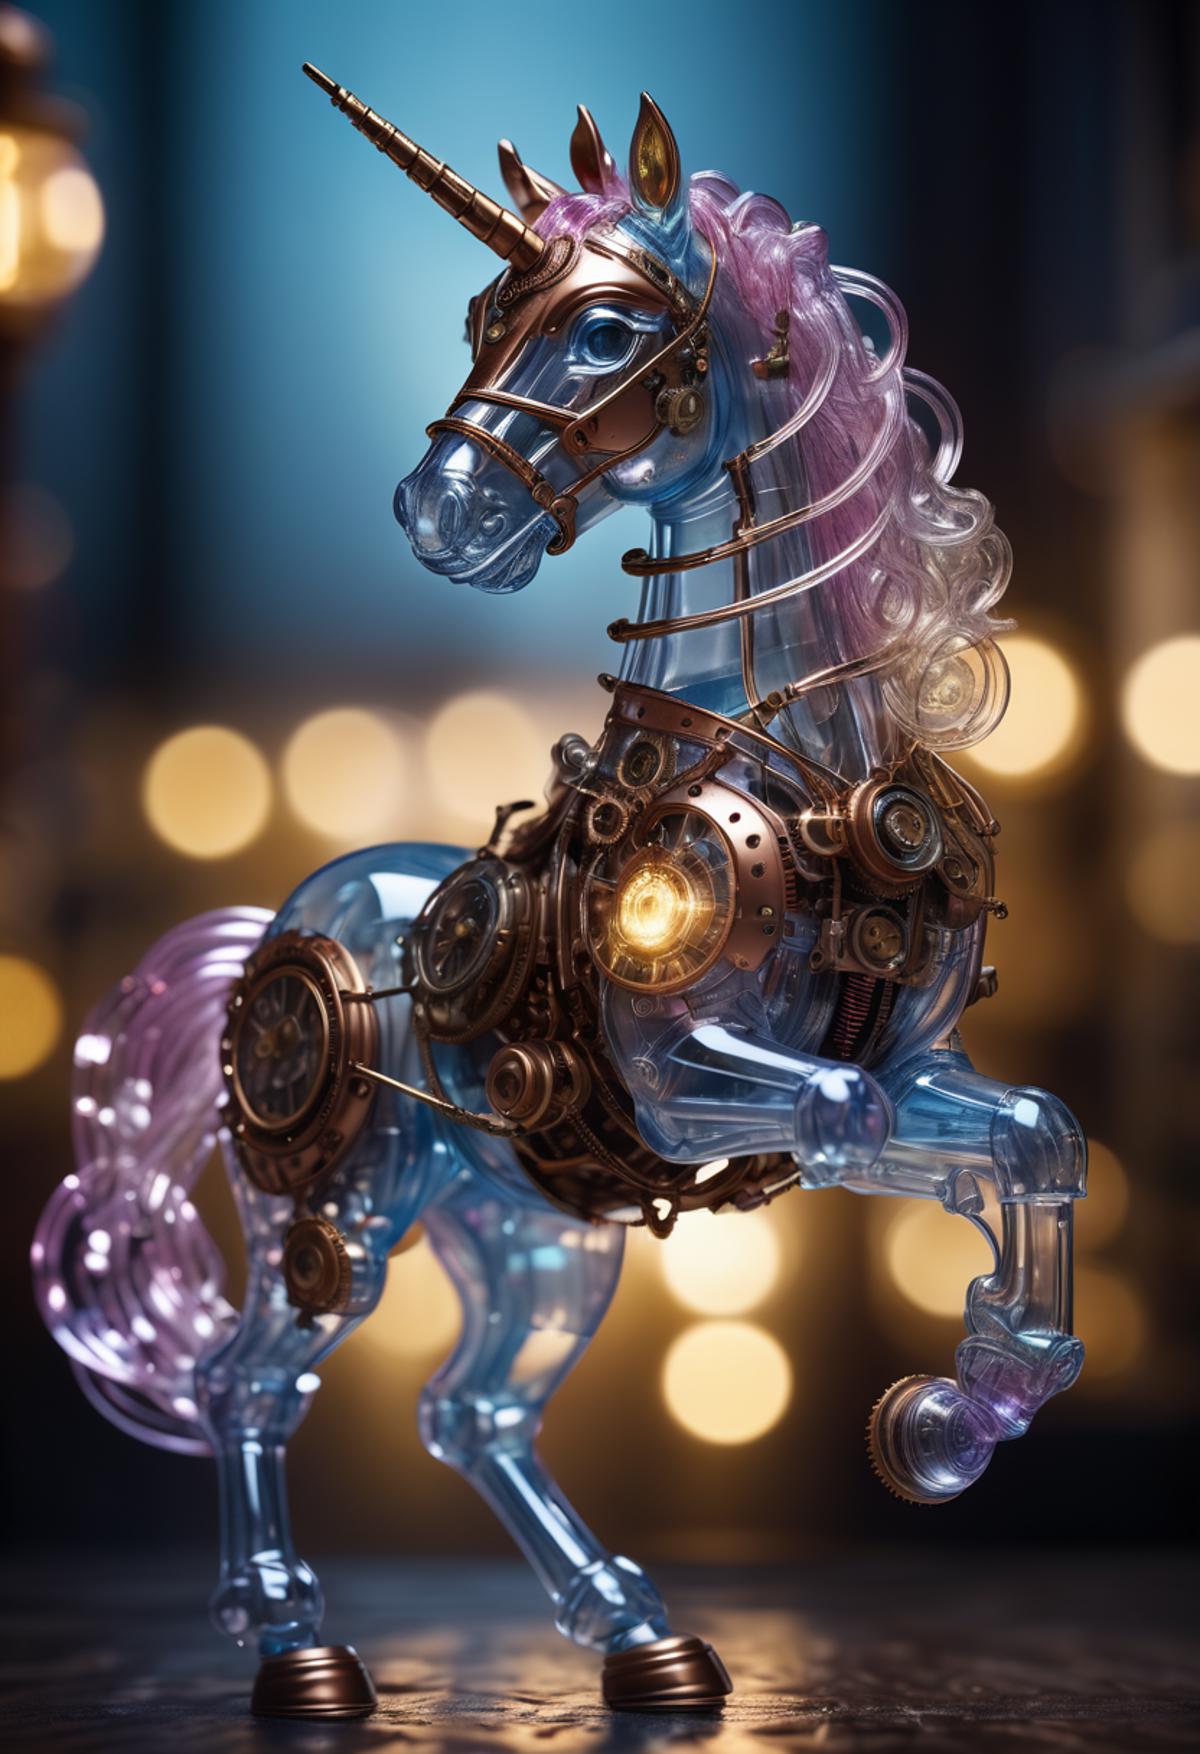 Glass and Metal Horse Sculpture with Blue Body and Pink Mane